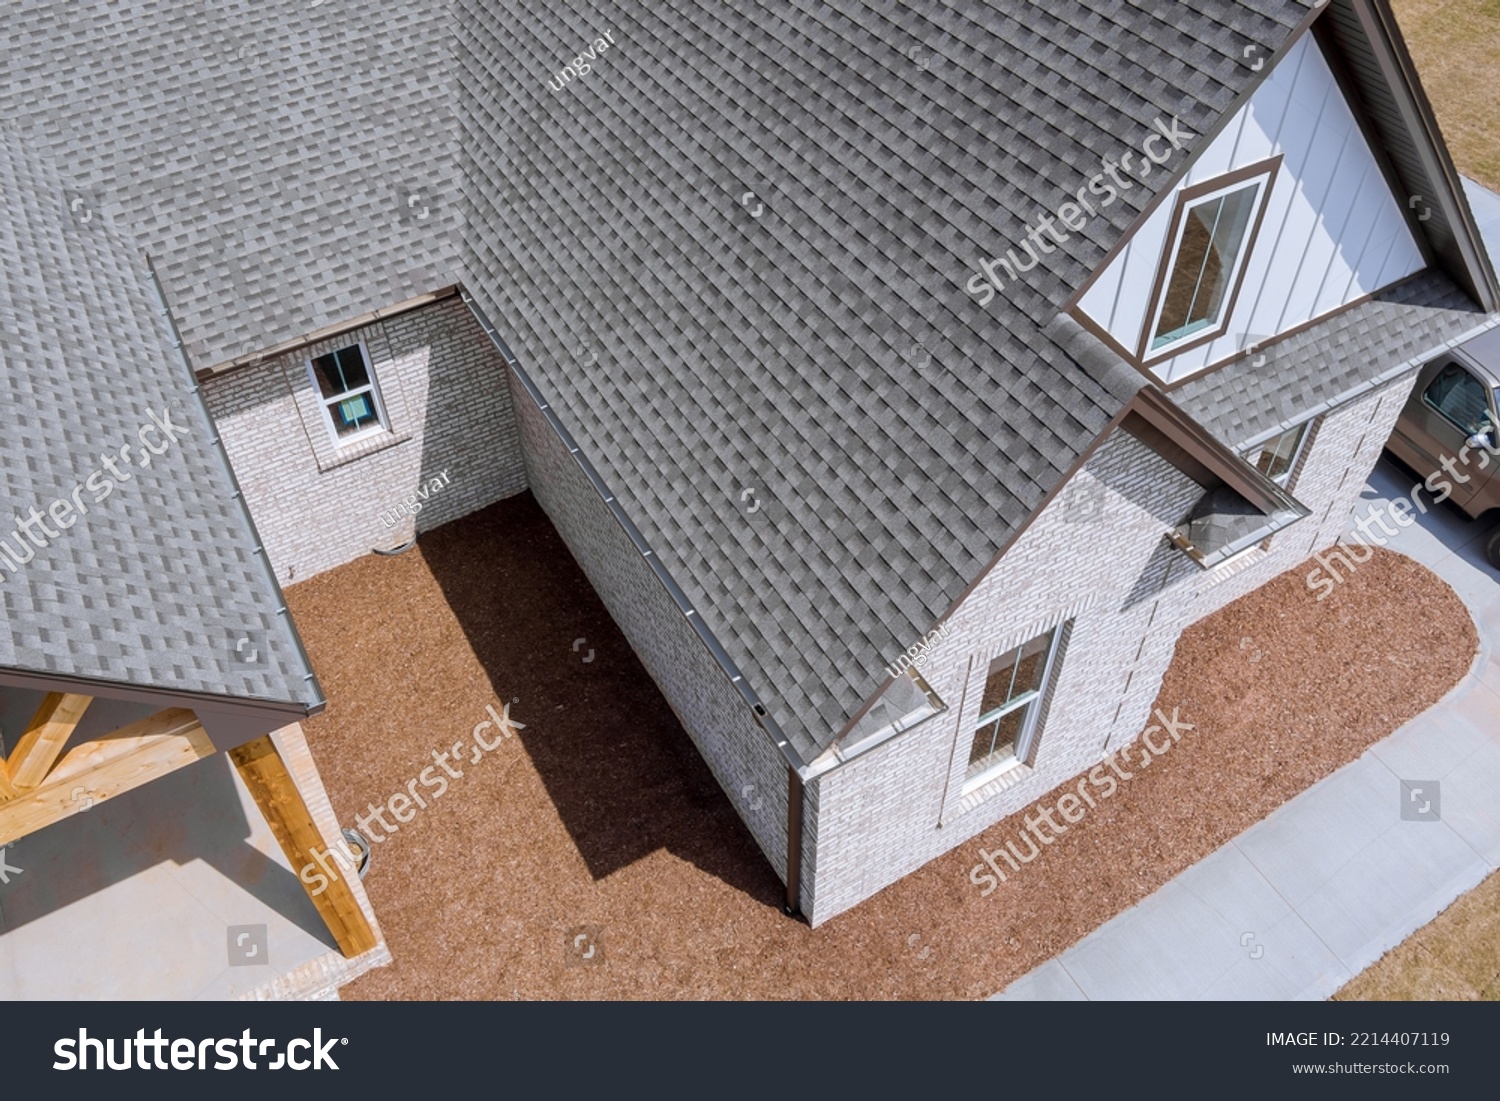 Roof of newly built house is being covered with asphalt shingles during construction while house is still being built #2214407119